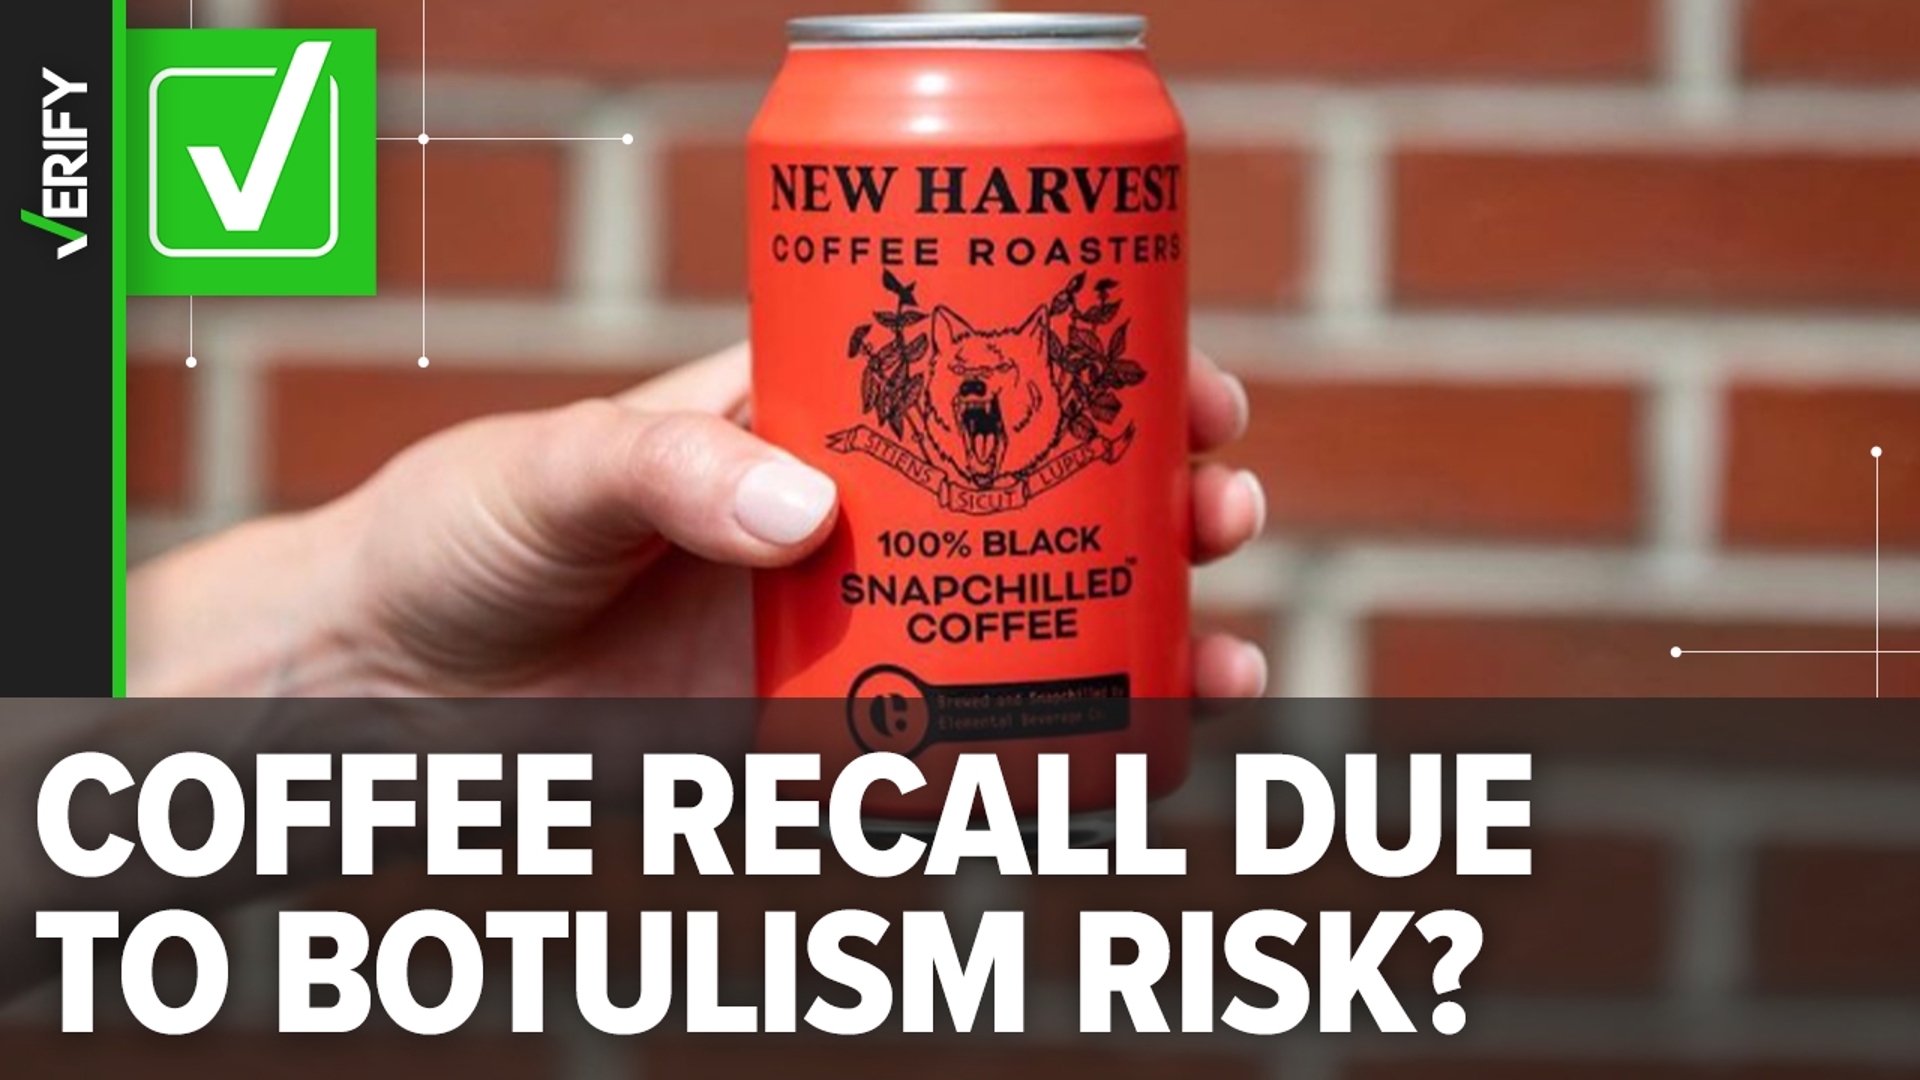 Snapchill Coffee, a company responsible for manufacturing hundreds of canned coffee drinks in the U.S., voluntarily recalled all of its products over botulism risk.